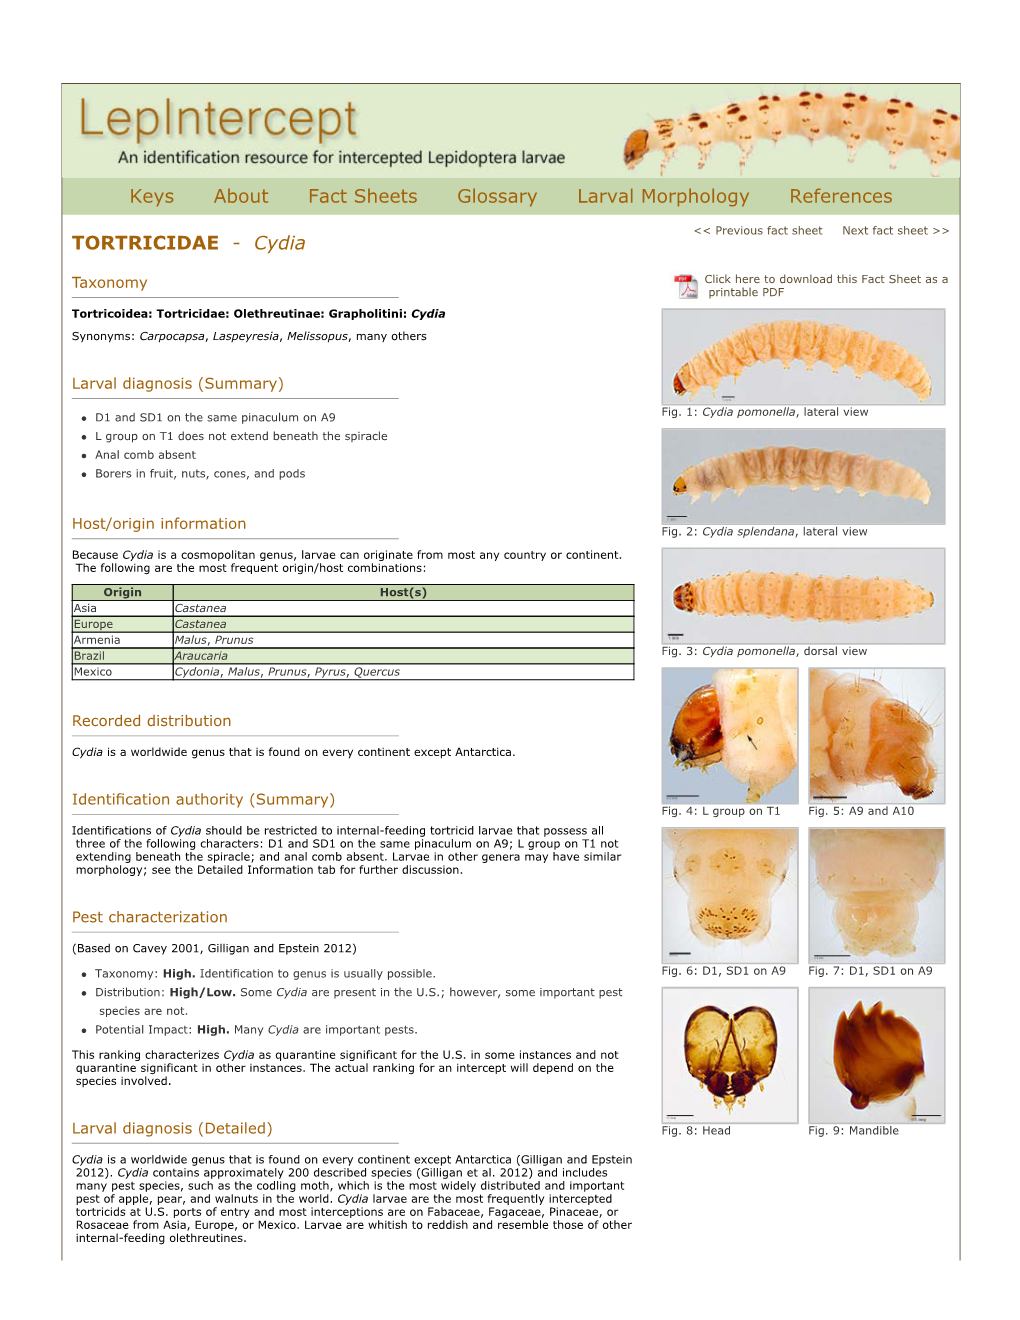 Keys About Fact Sheets Glossary Larval Morphology References